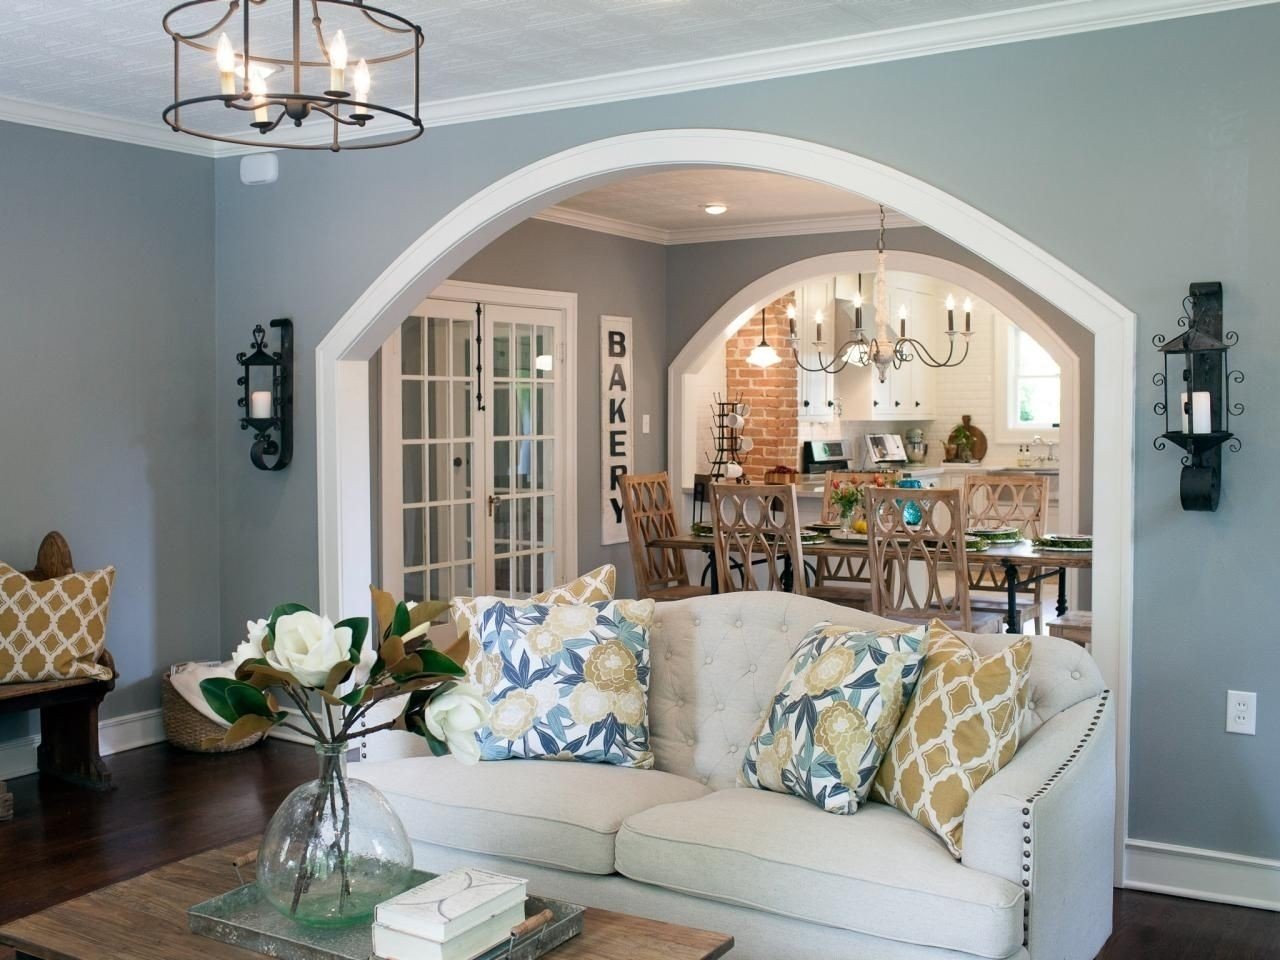 10 Unique Hgtv Living Room Paint Ideas living room paint color schemes s hgtv s fixer upper with chip and 2022